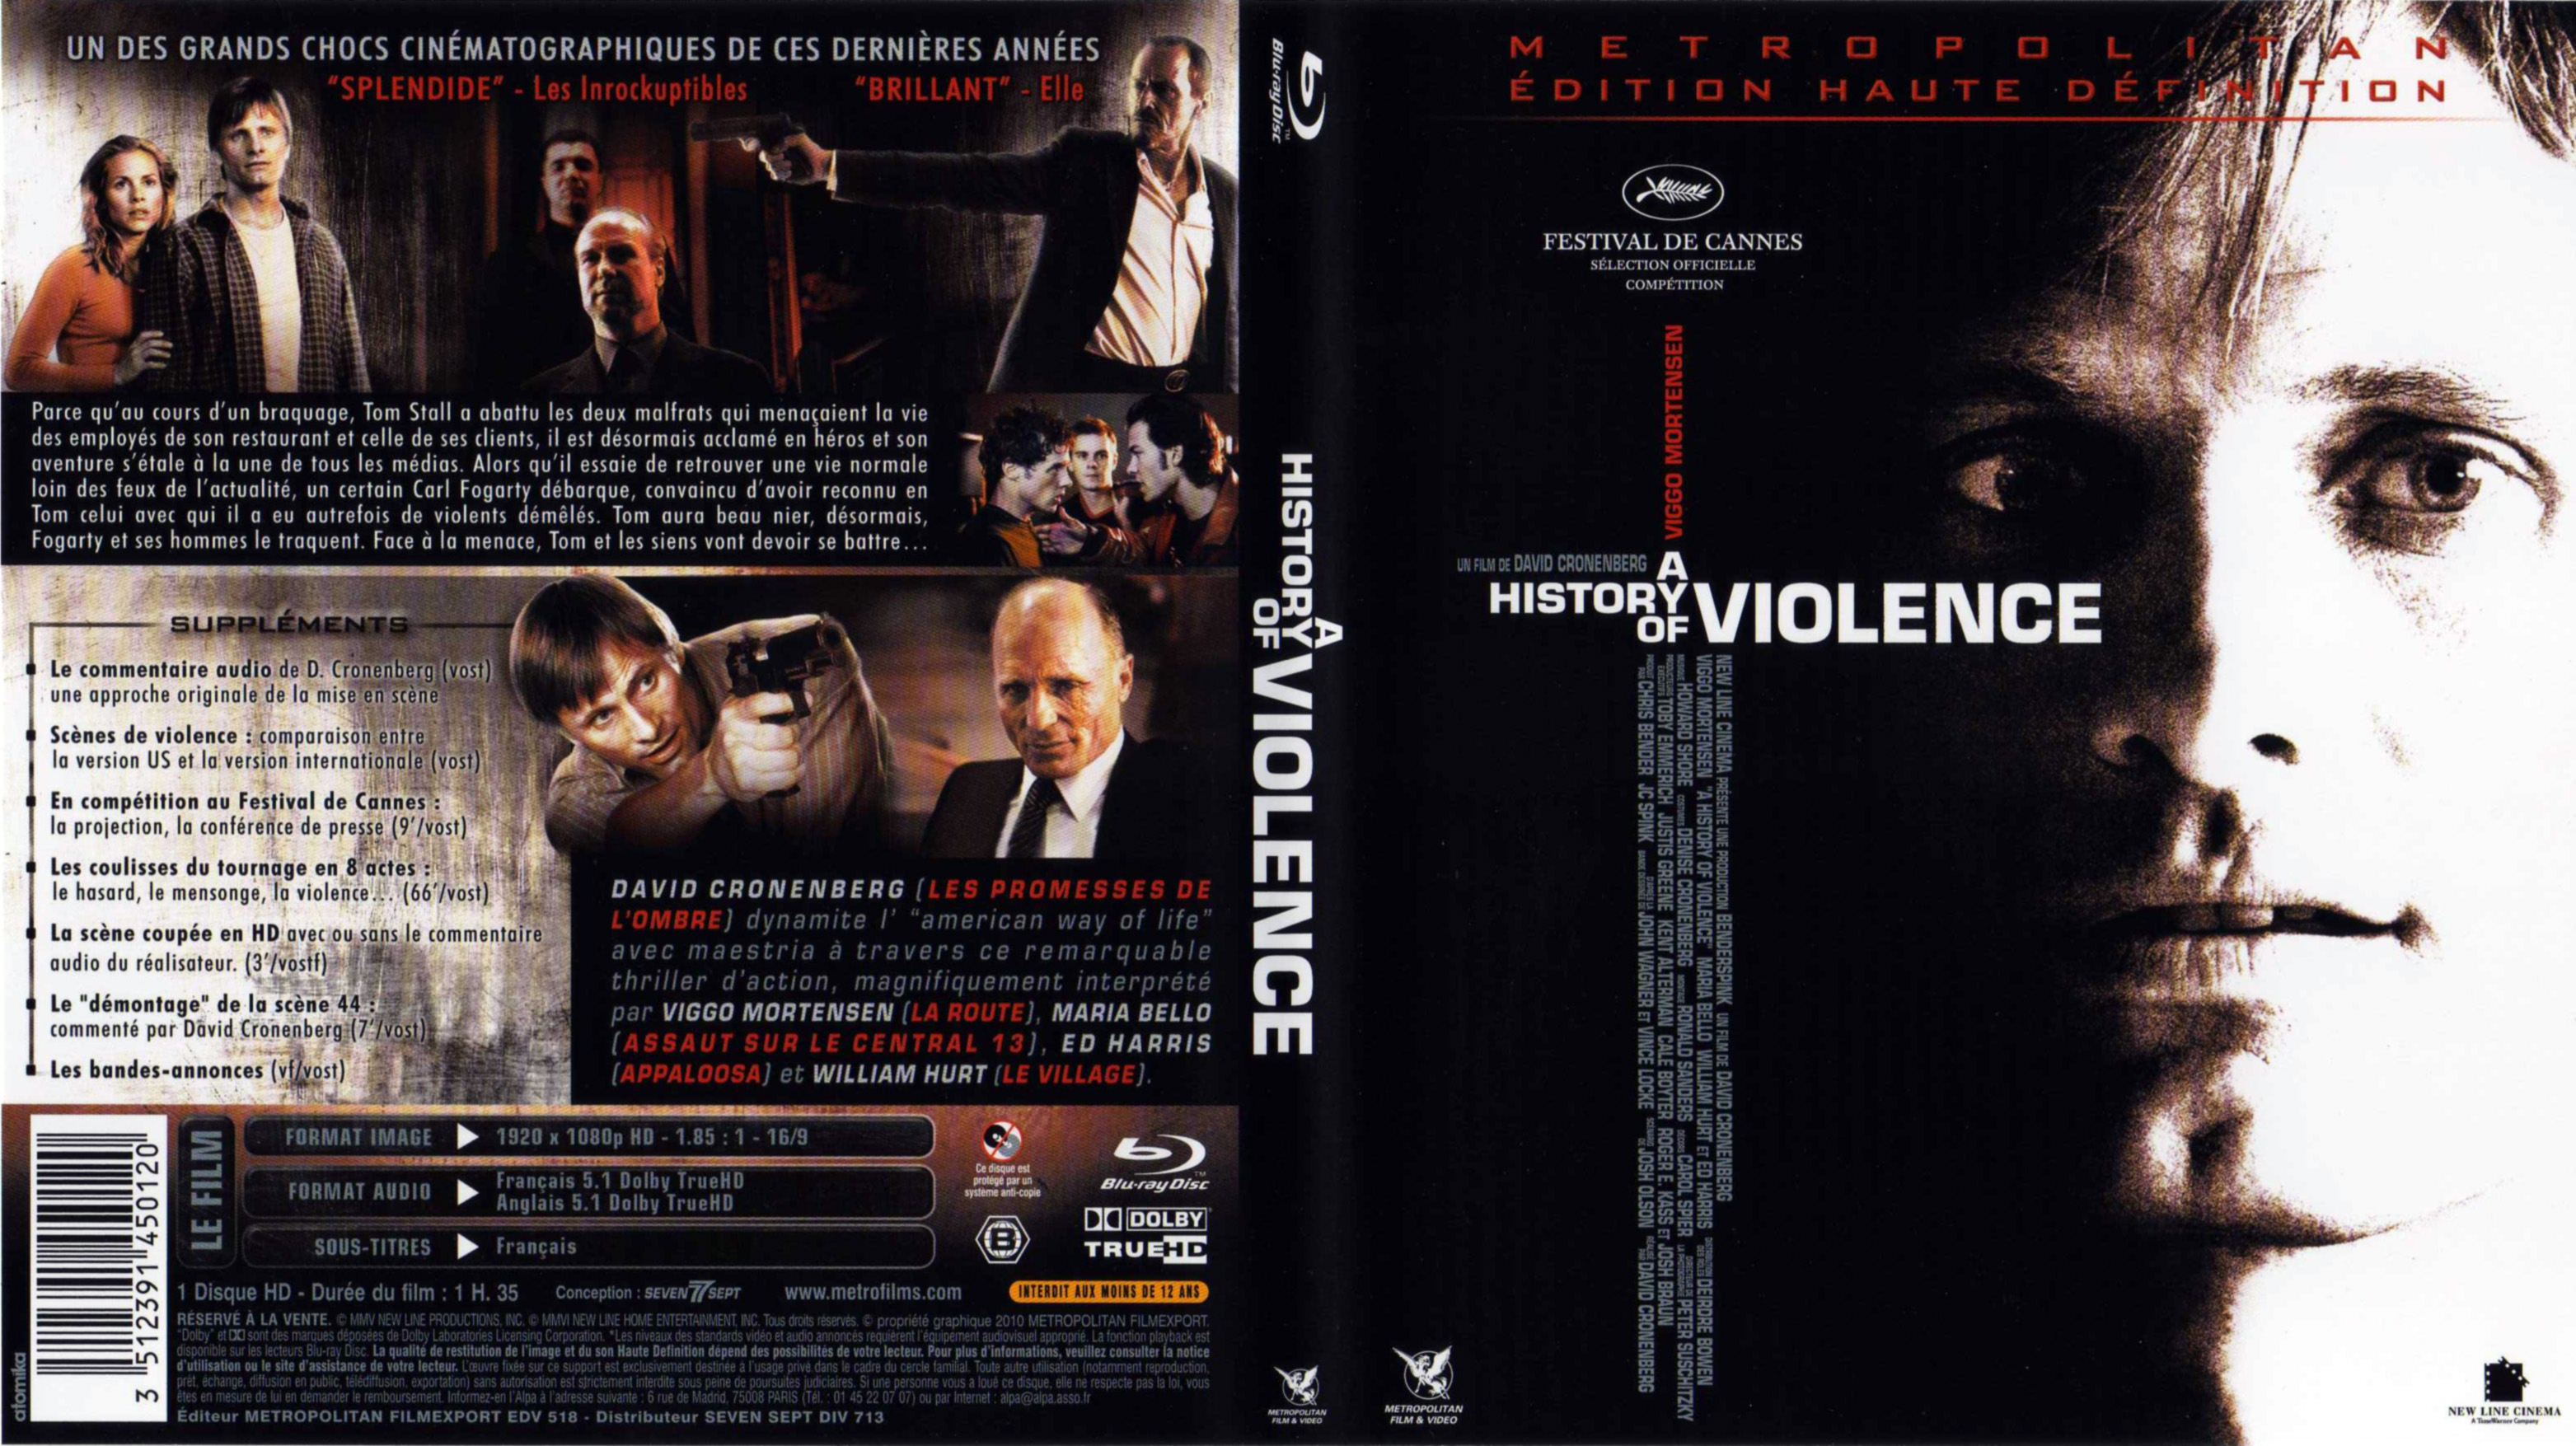 Jaquette DVD A history of violence (BLU-RAY)